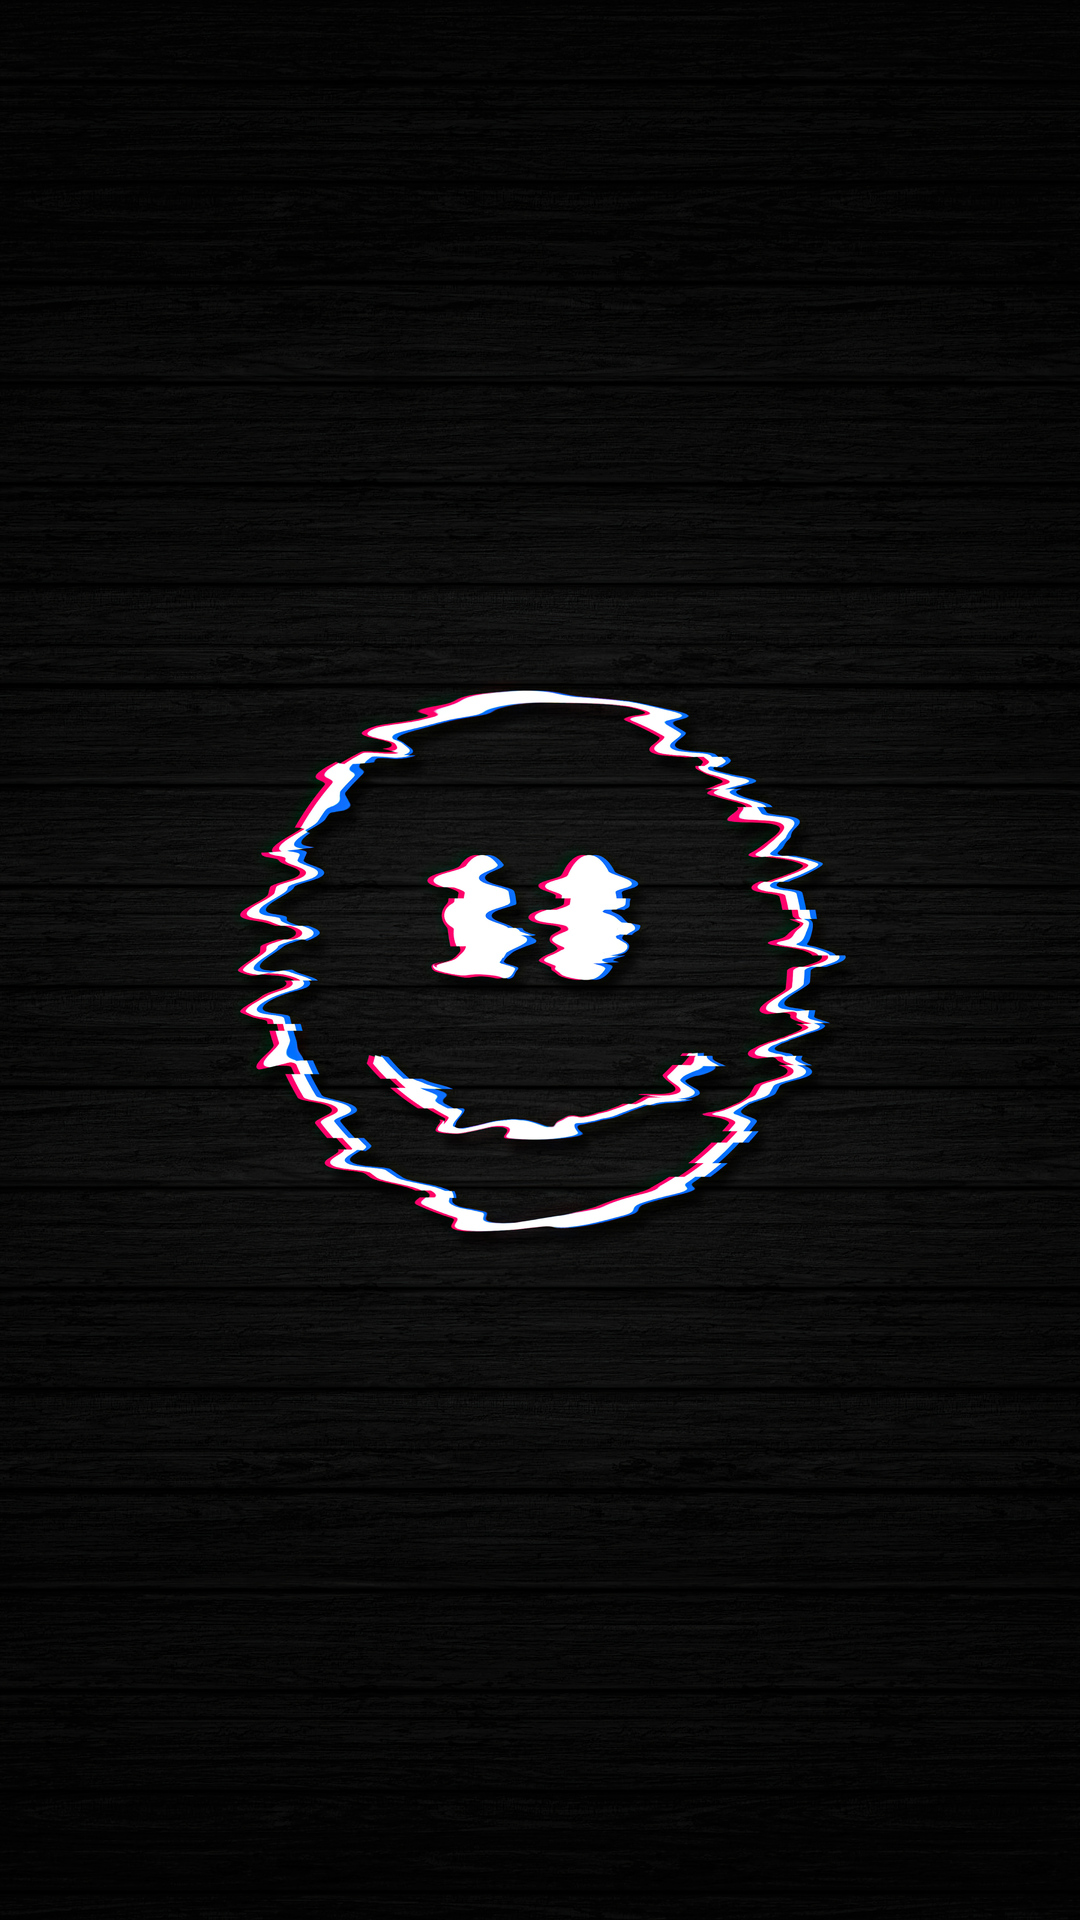 Black background with a smiley face in the center - Glitch